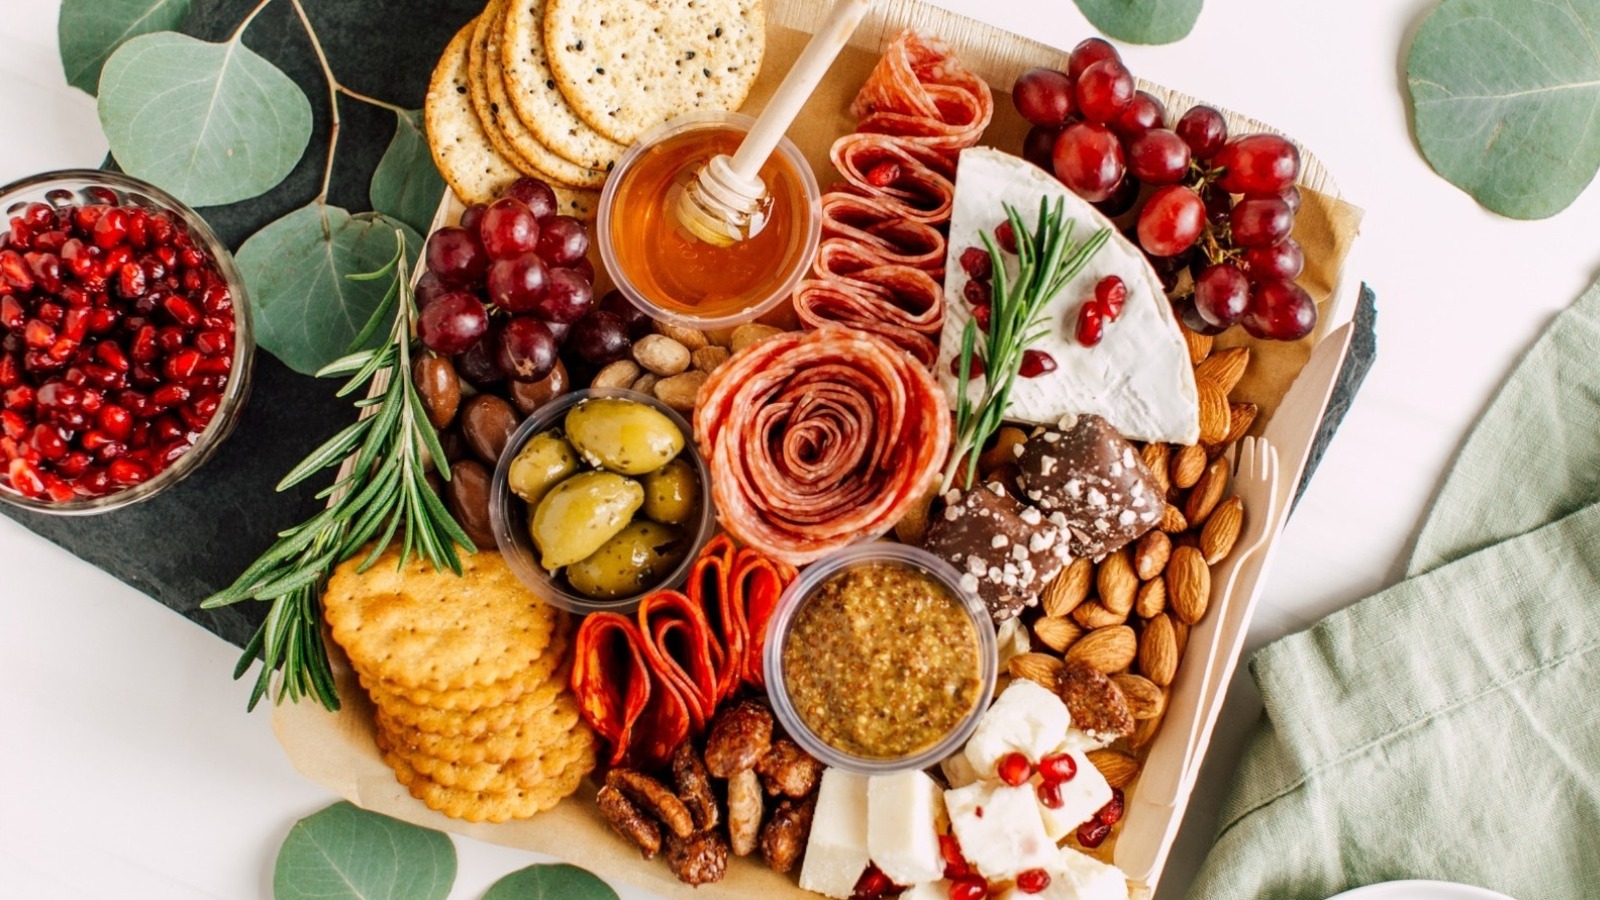 Snackle Box: The Ultimate Traveling Charcuterie Board